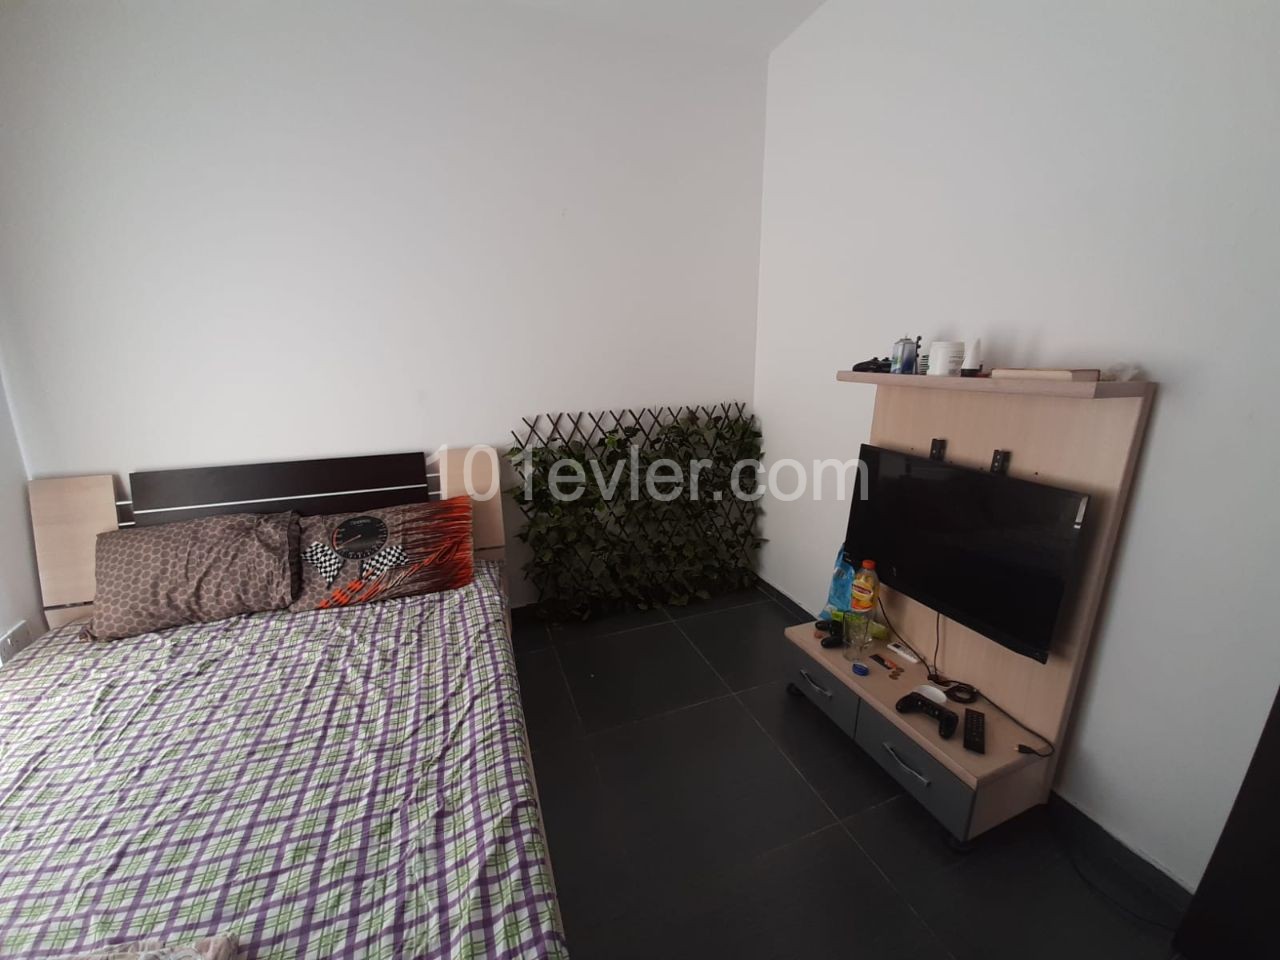 PENTHOUSE RENT 3 + 2 JAHRESZAHLUNG 30.000 TL DEPOSIT 2000 TL AND COMMISSION ** 